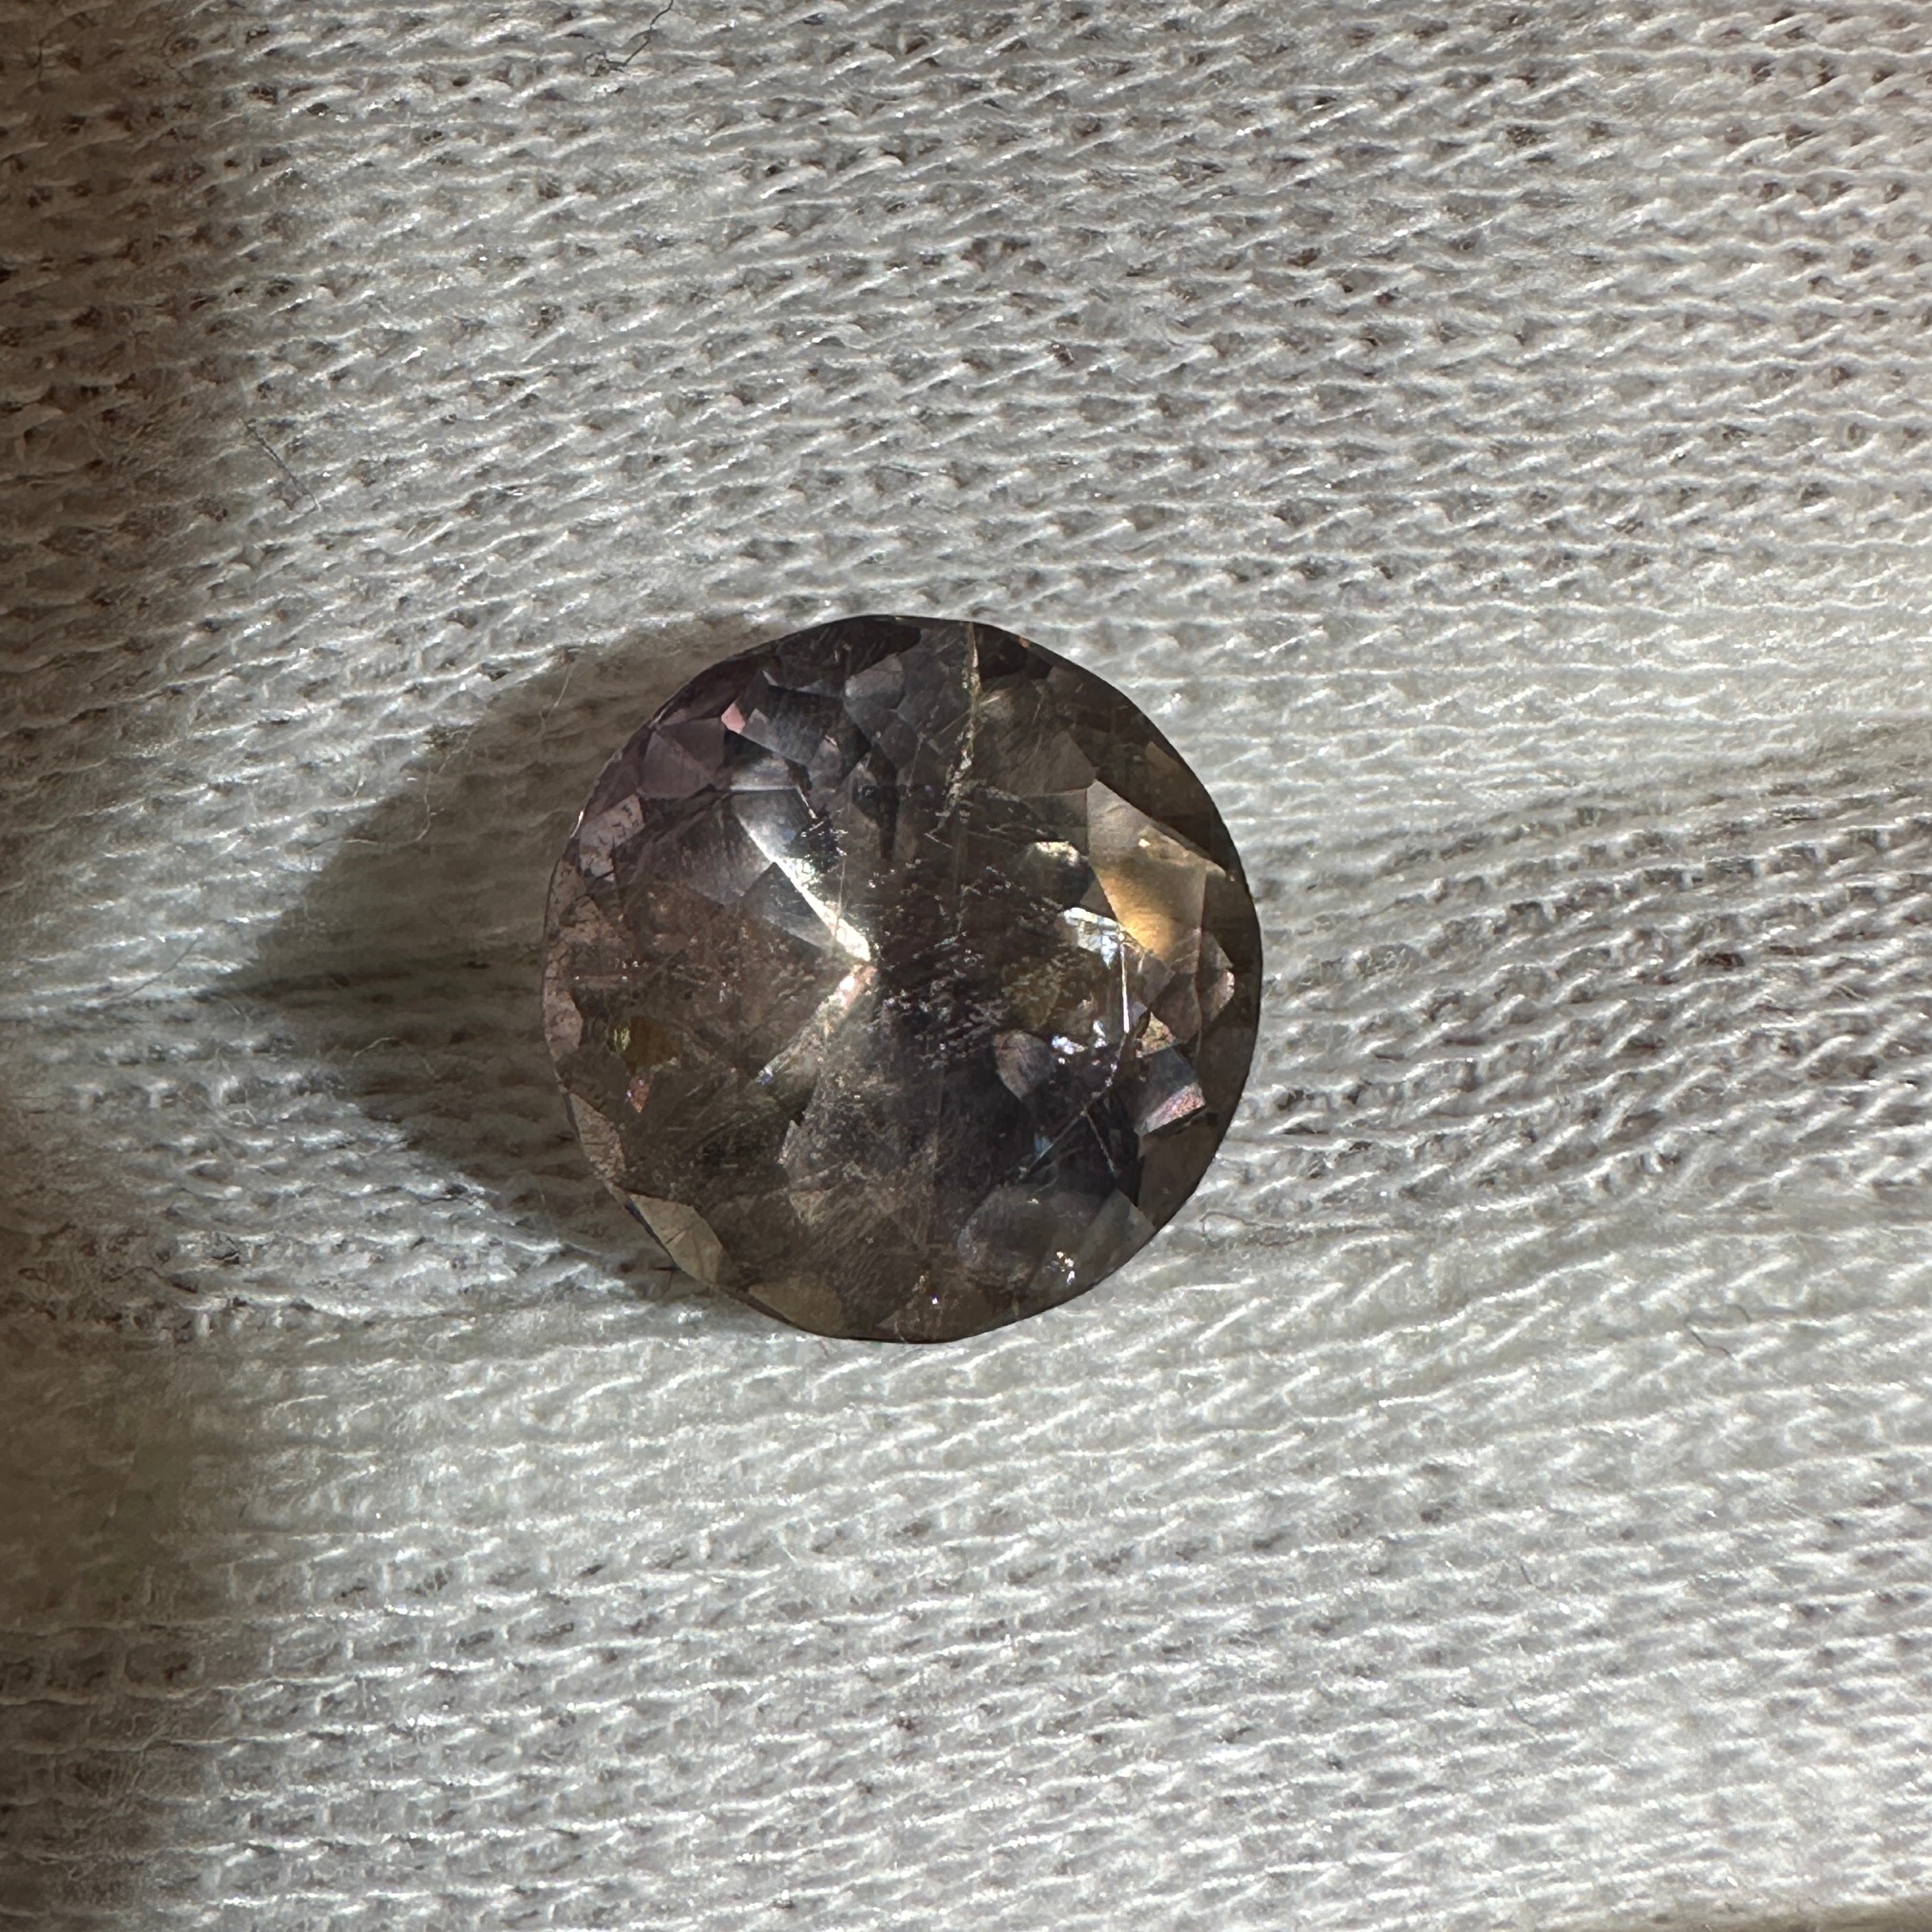 4.84ct Colour Change Sapphire, Umba, Tanzania. Untreated Unheated. See photos for colour change